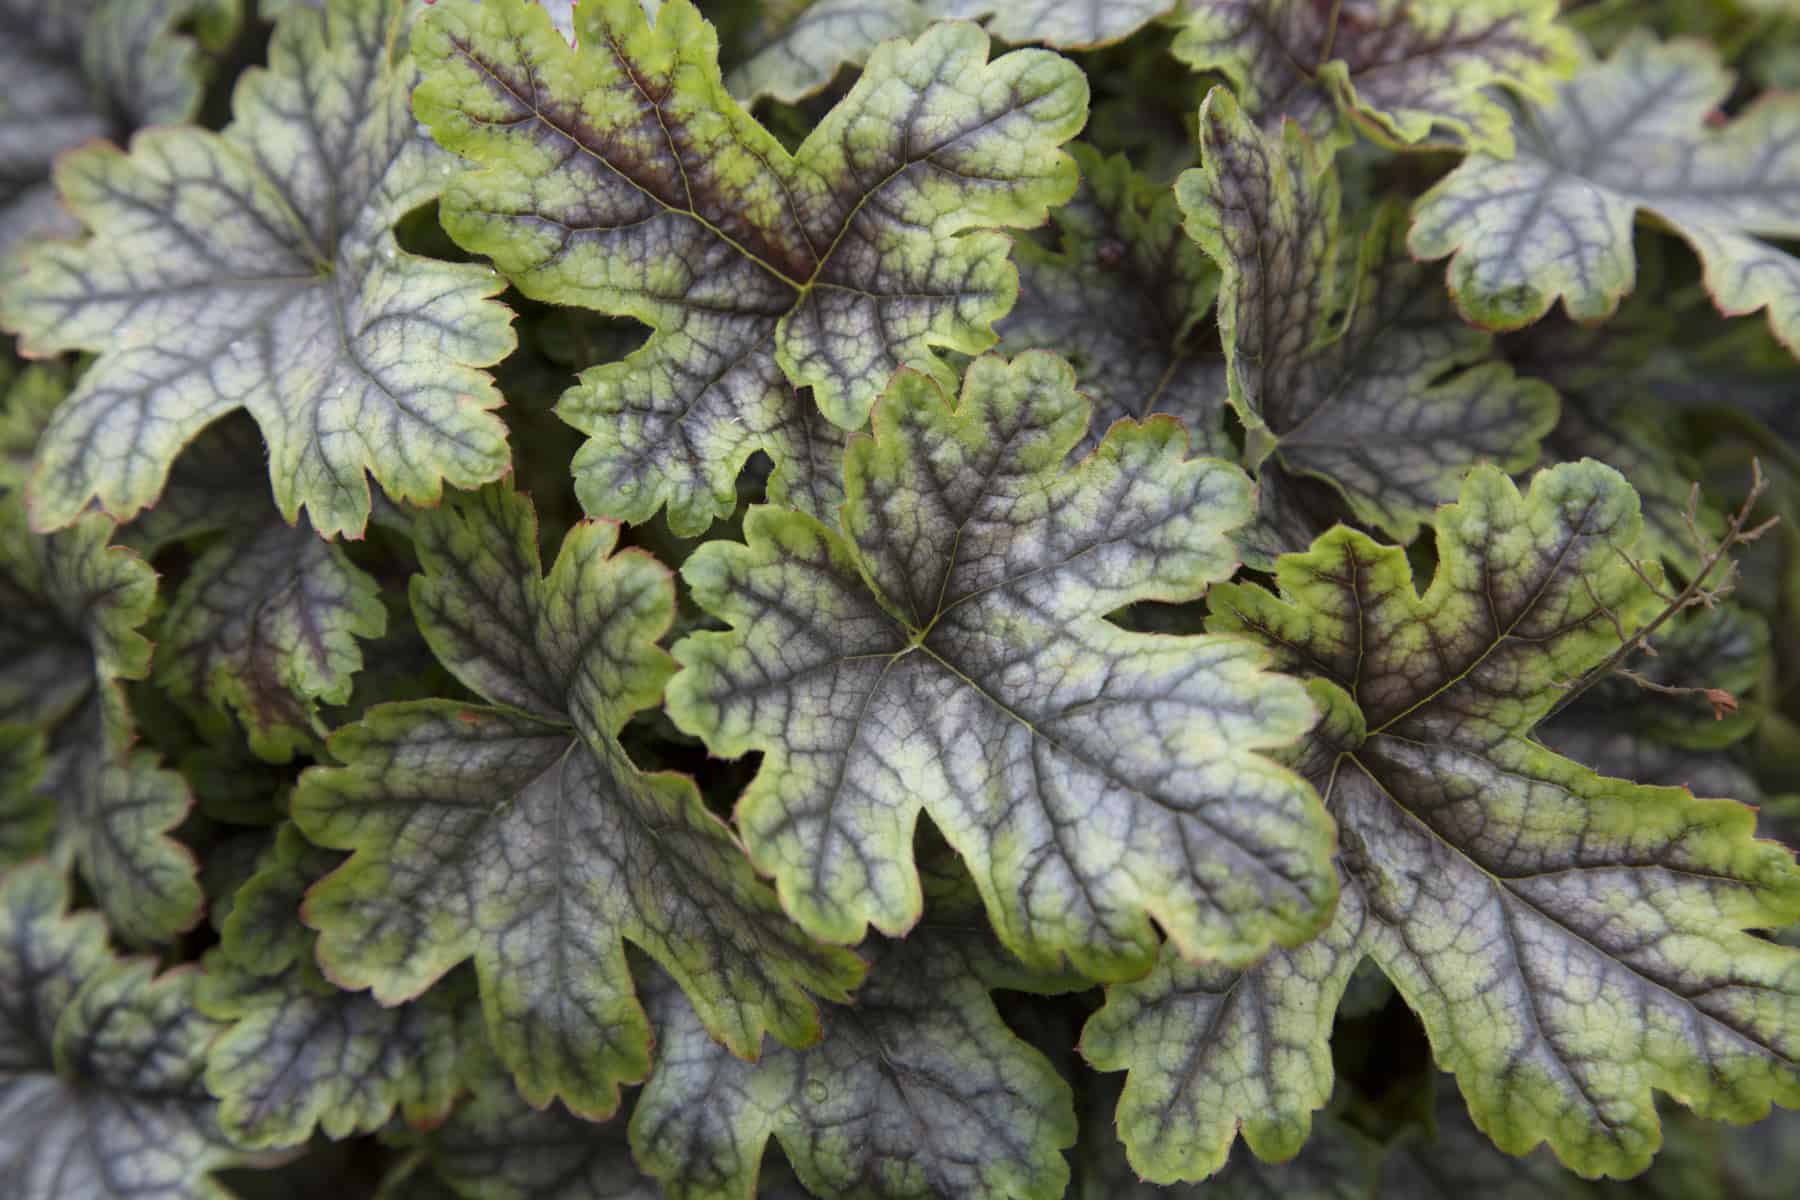 Close up of Tapestry Heucherella's leaves show purple-gray veining on yellow-green maple-shaped leaves